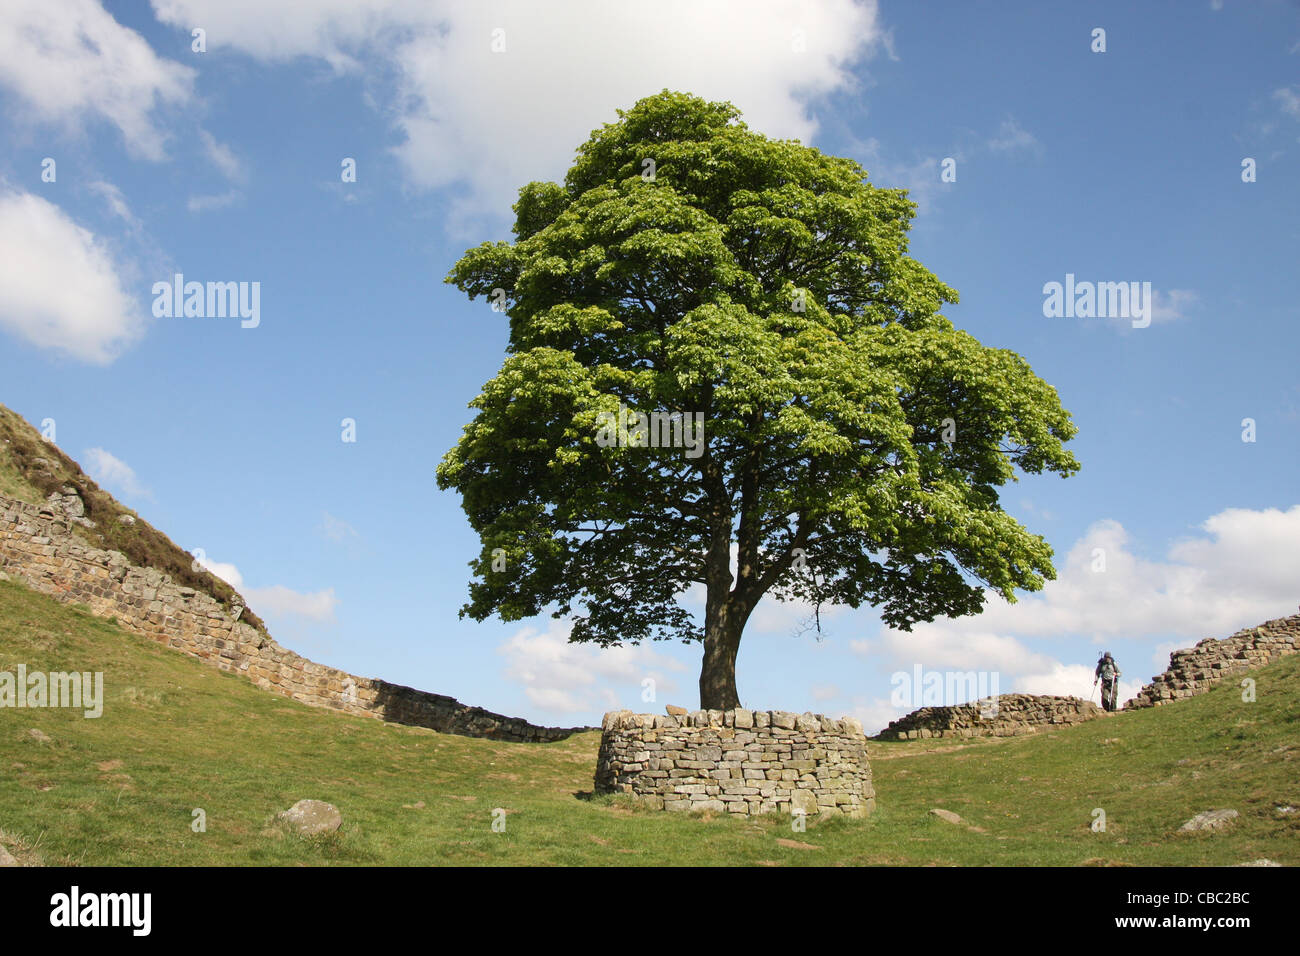 Sycamore Gap in Hadrian's Wall. The Robin Hood Tree came about when it was used as a setting in “Robin Hood Prince of Thieves'. Stock Photo